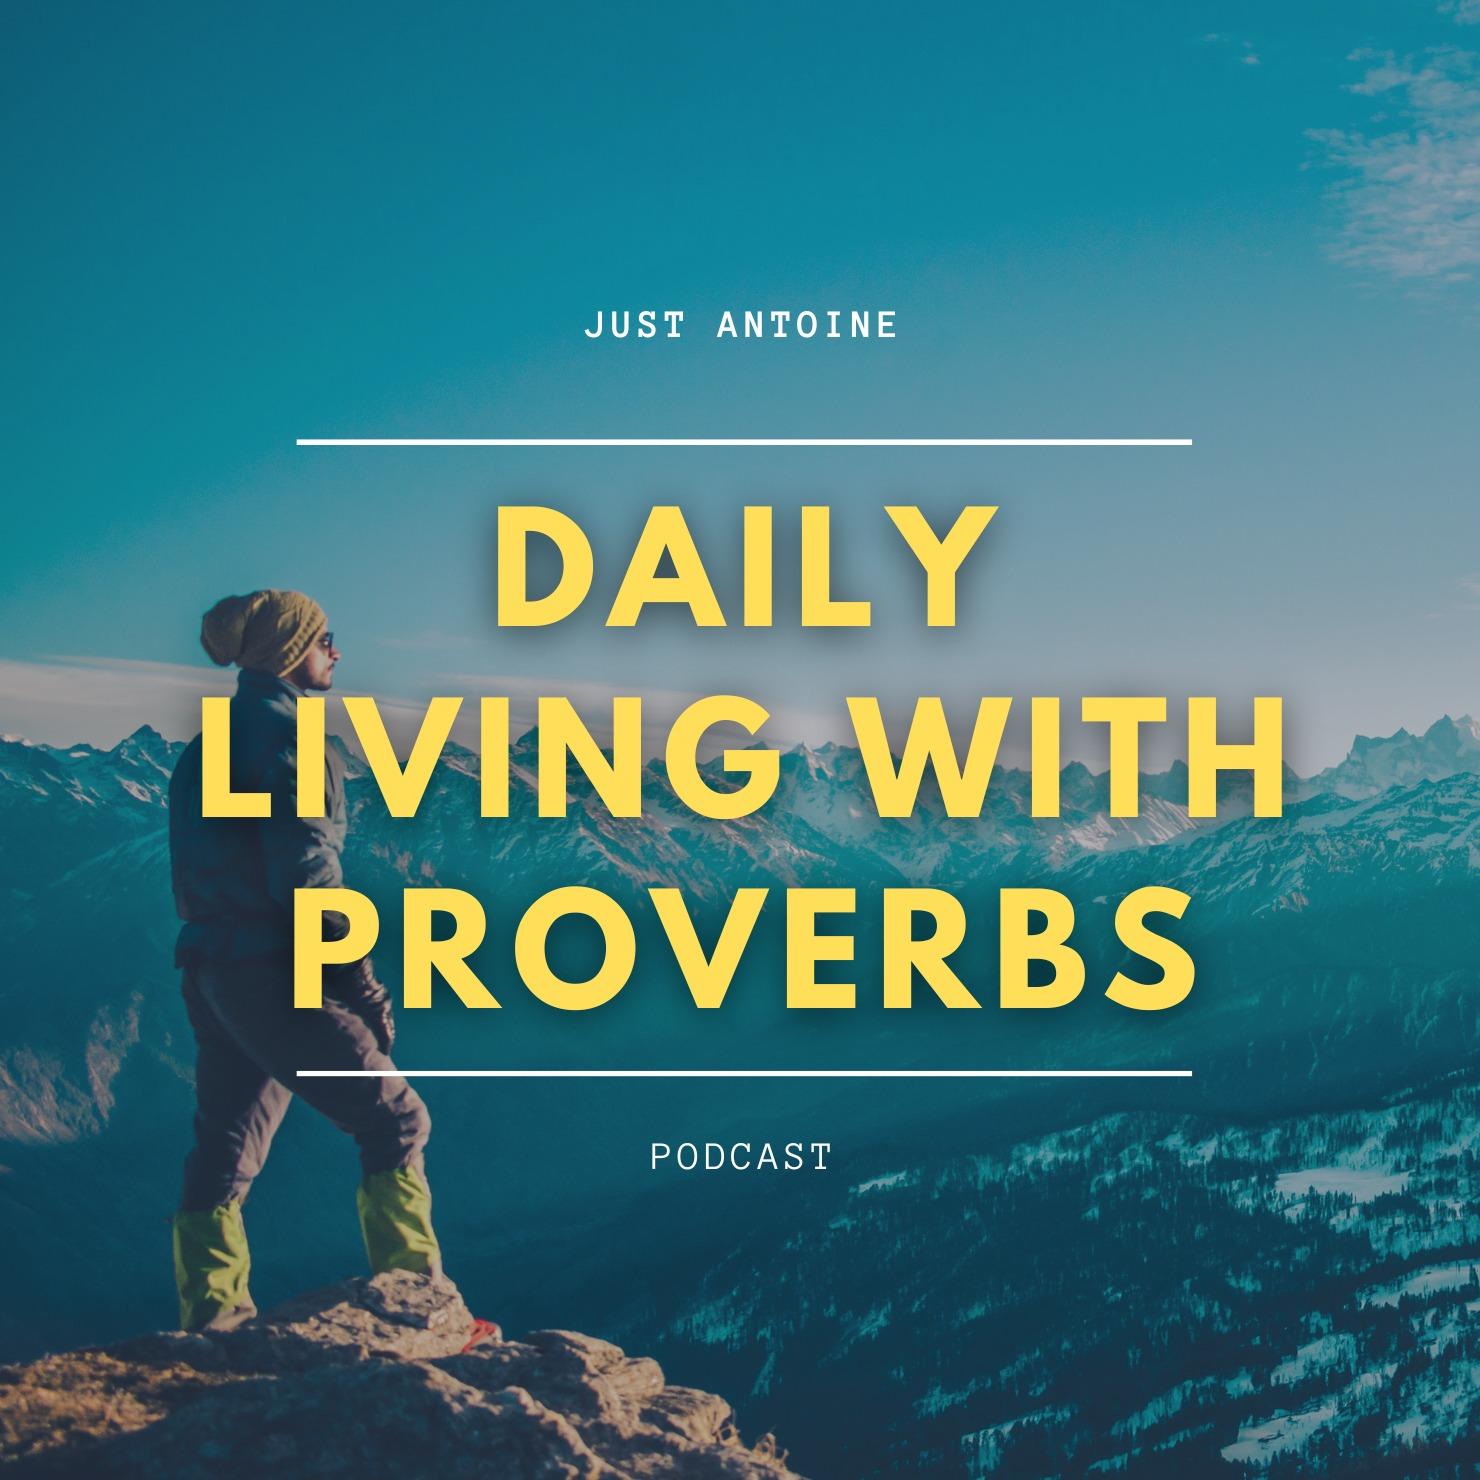 Daily Living with Proverbs